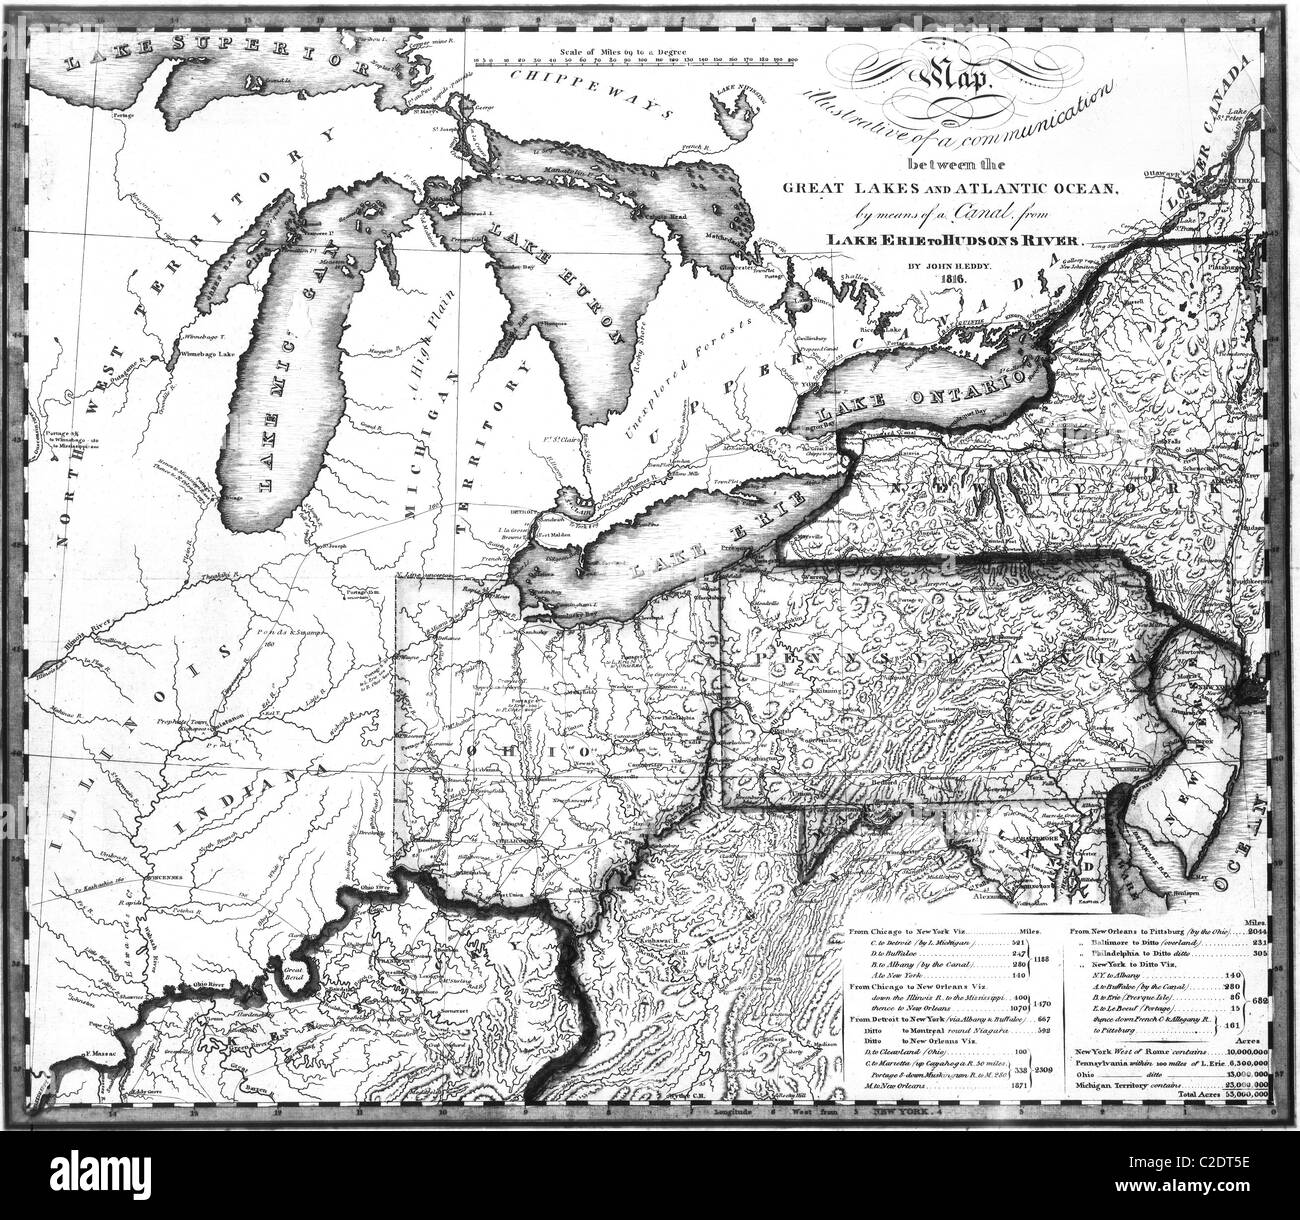 Map of the Great Lakes region in 1816 by John Eddy Stock Photo